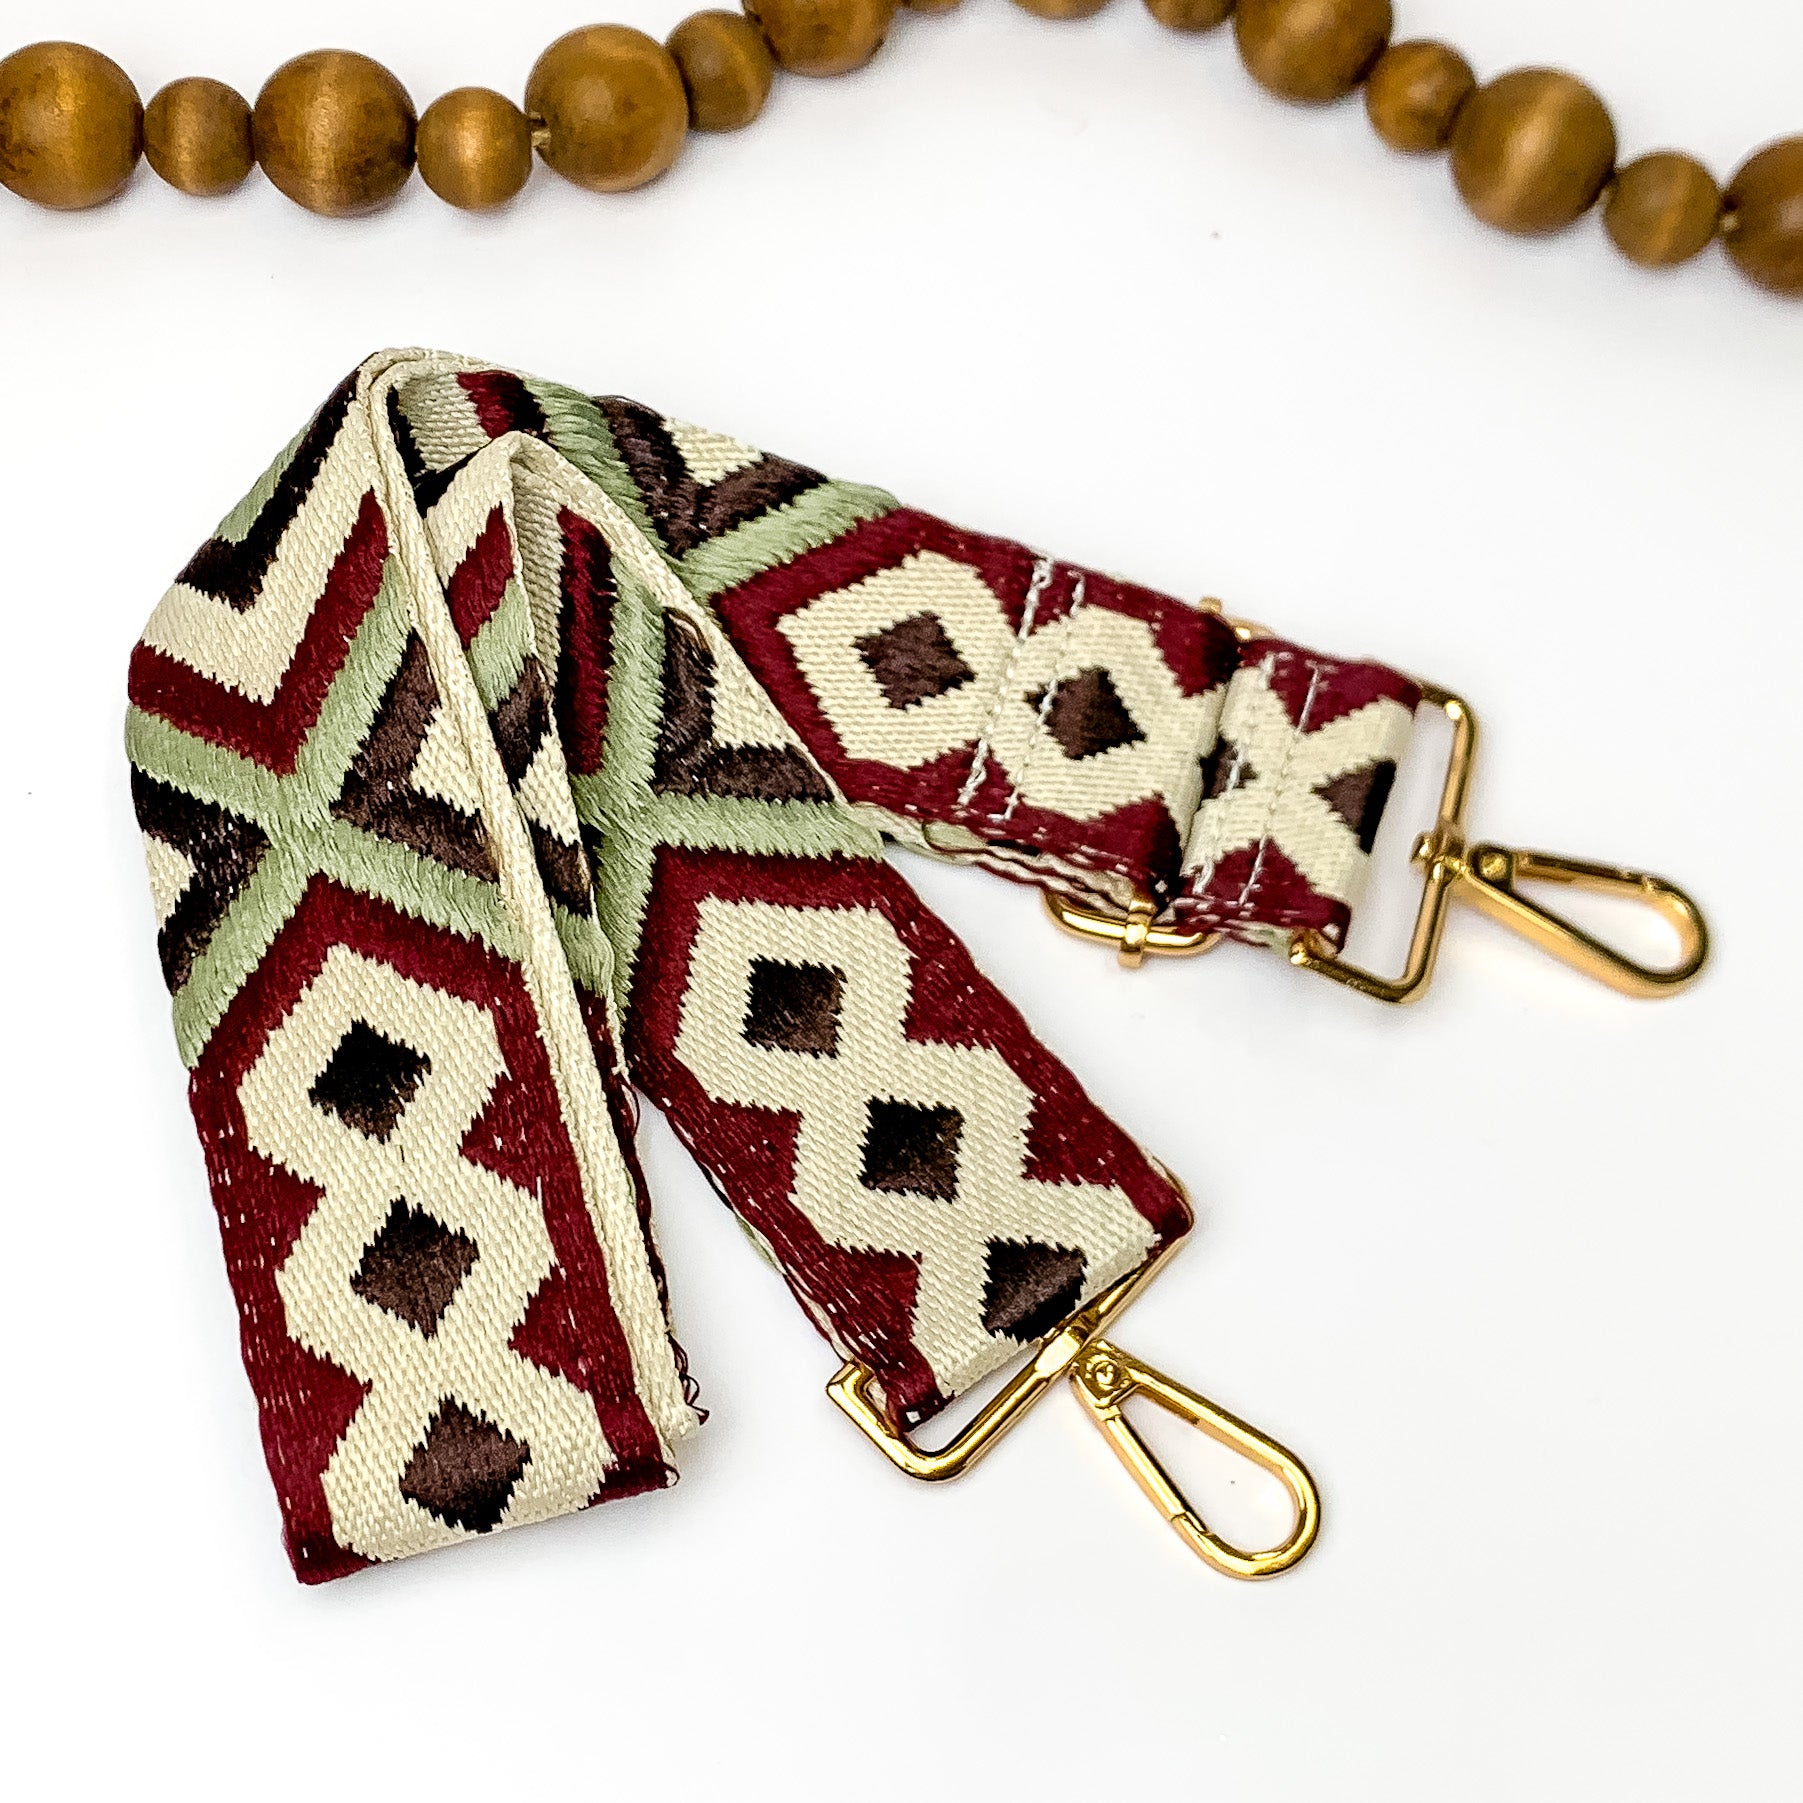 Beige canvas purse strap with dark brown, maroon, and olive green embroidered design. This purse strap includes gold accents. This purse strap is pictured on a white background with wood beads at the top.